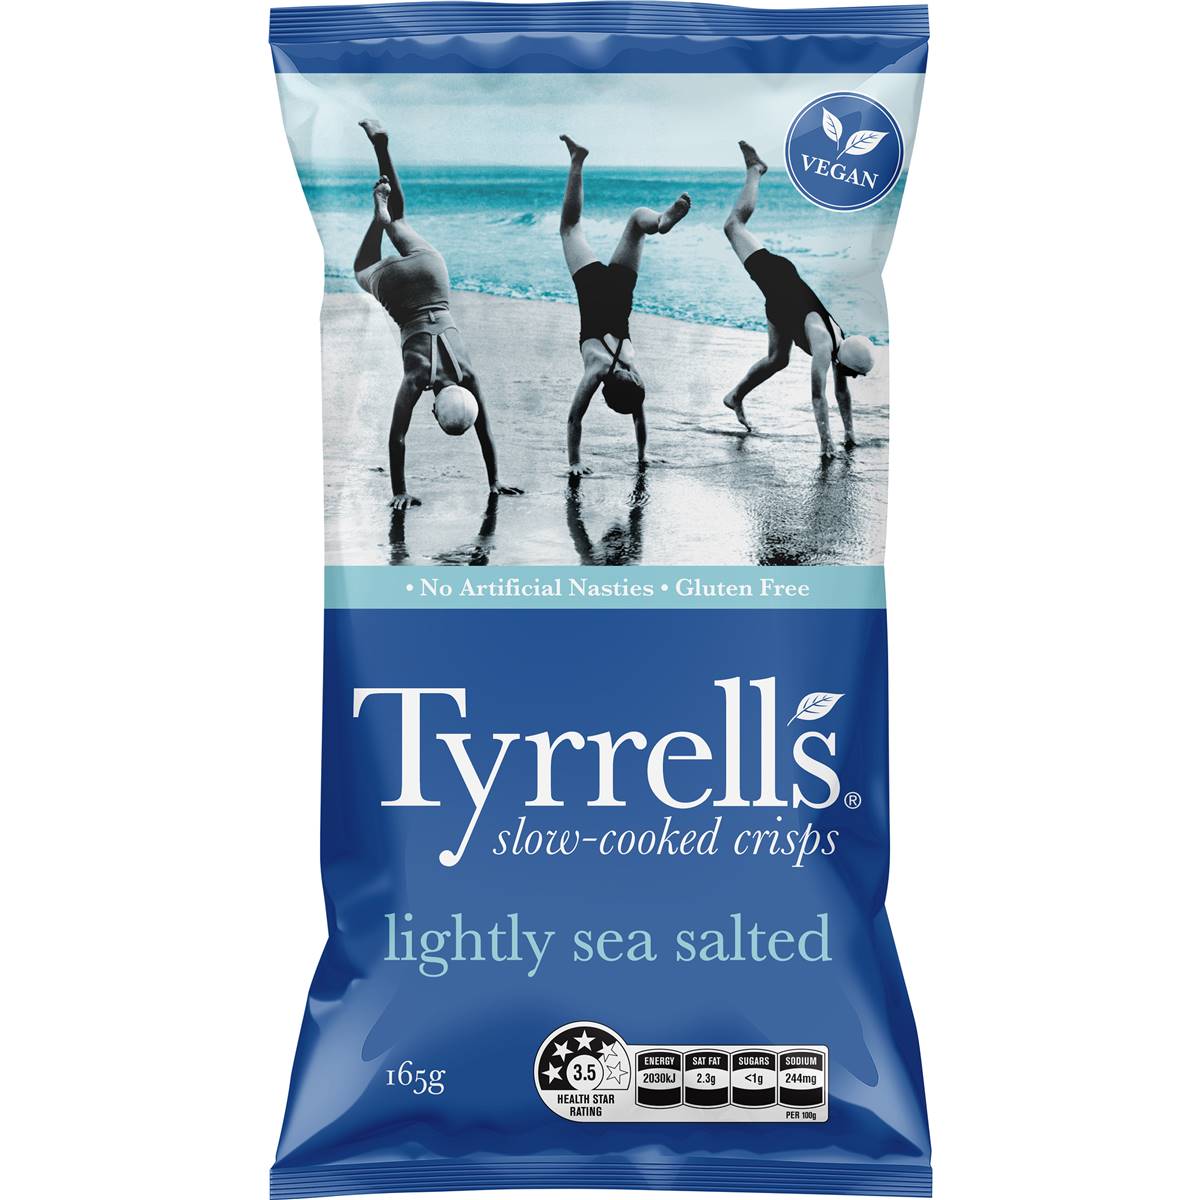 Calories in Tyrrell's Chips Lightly Salted